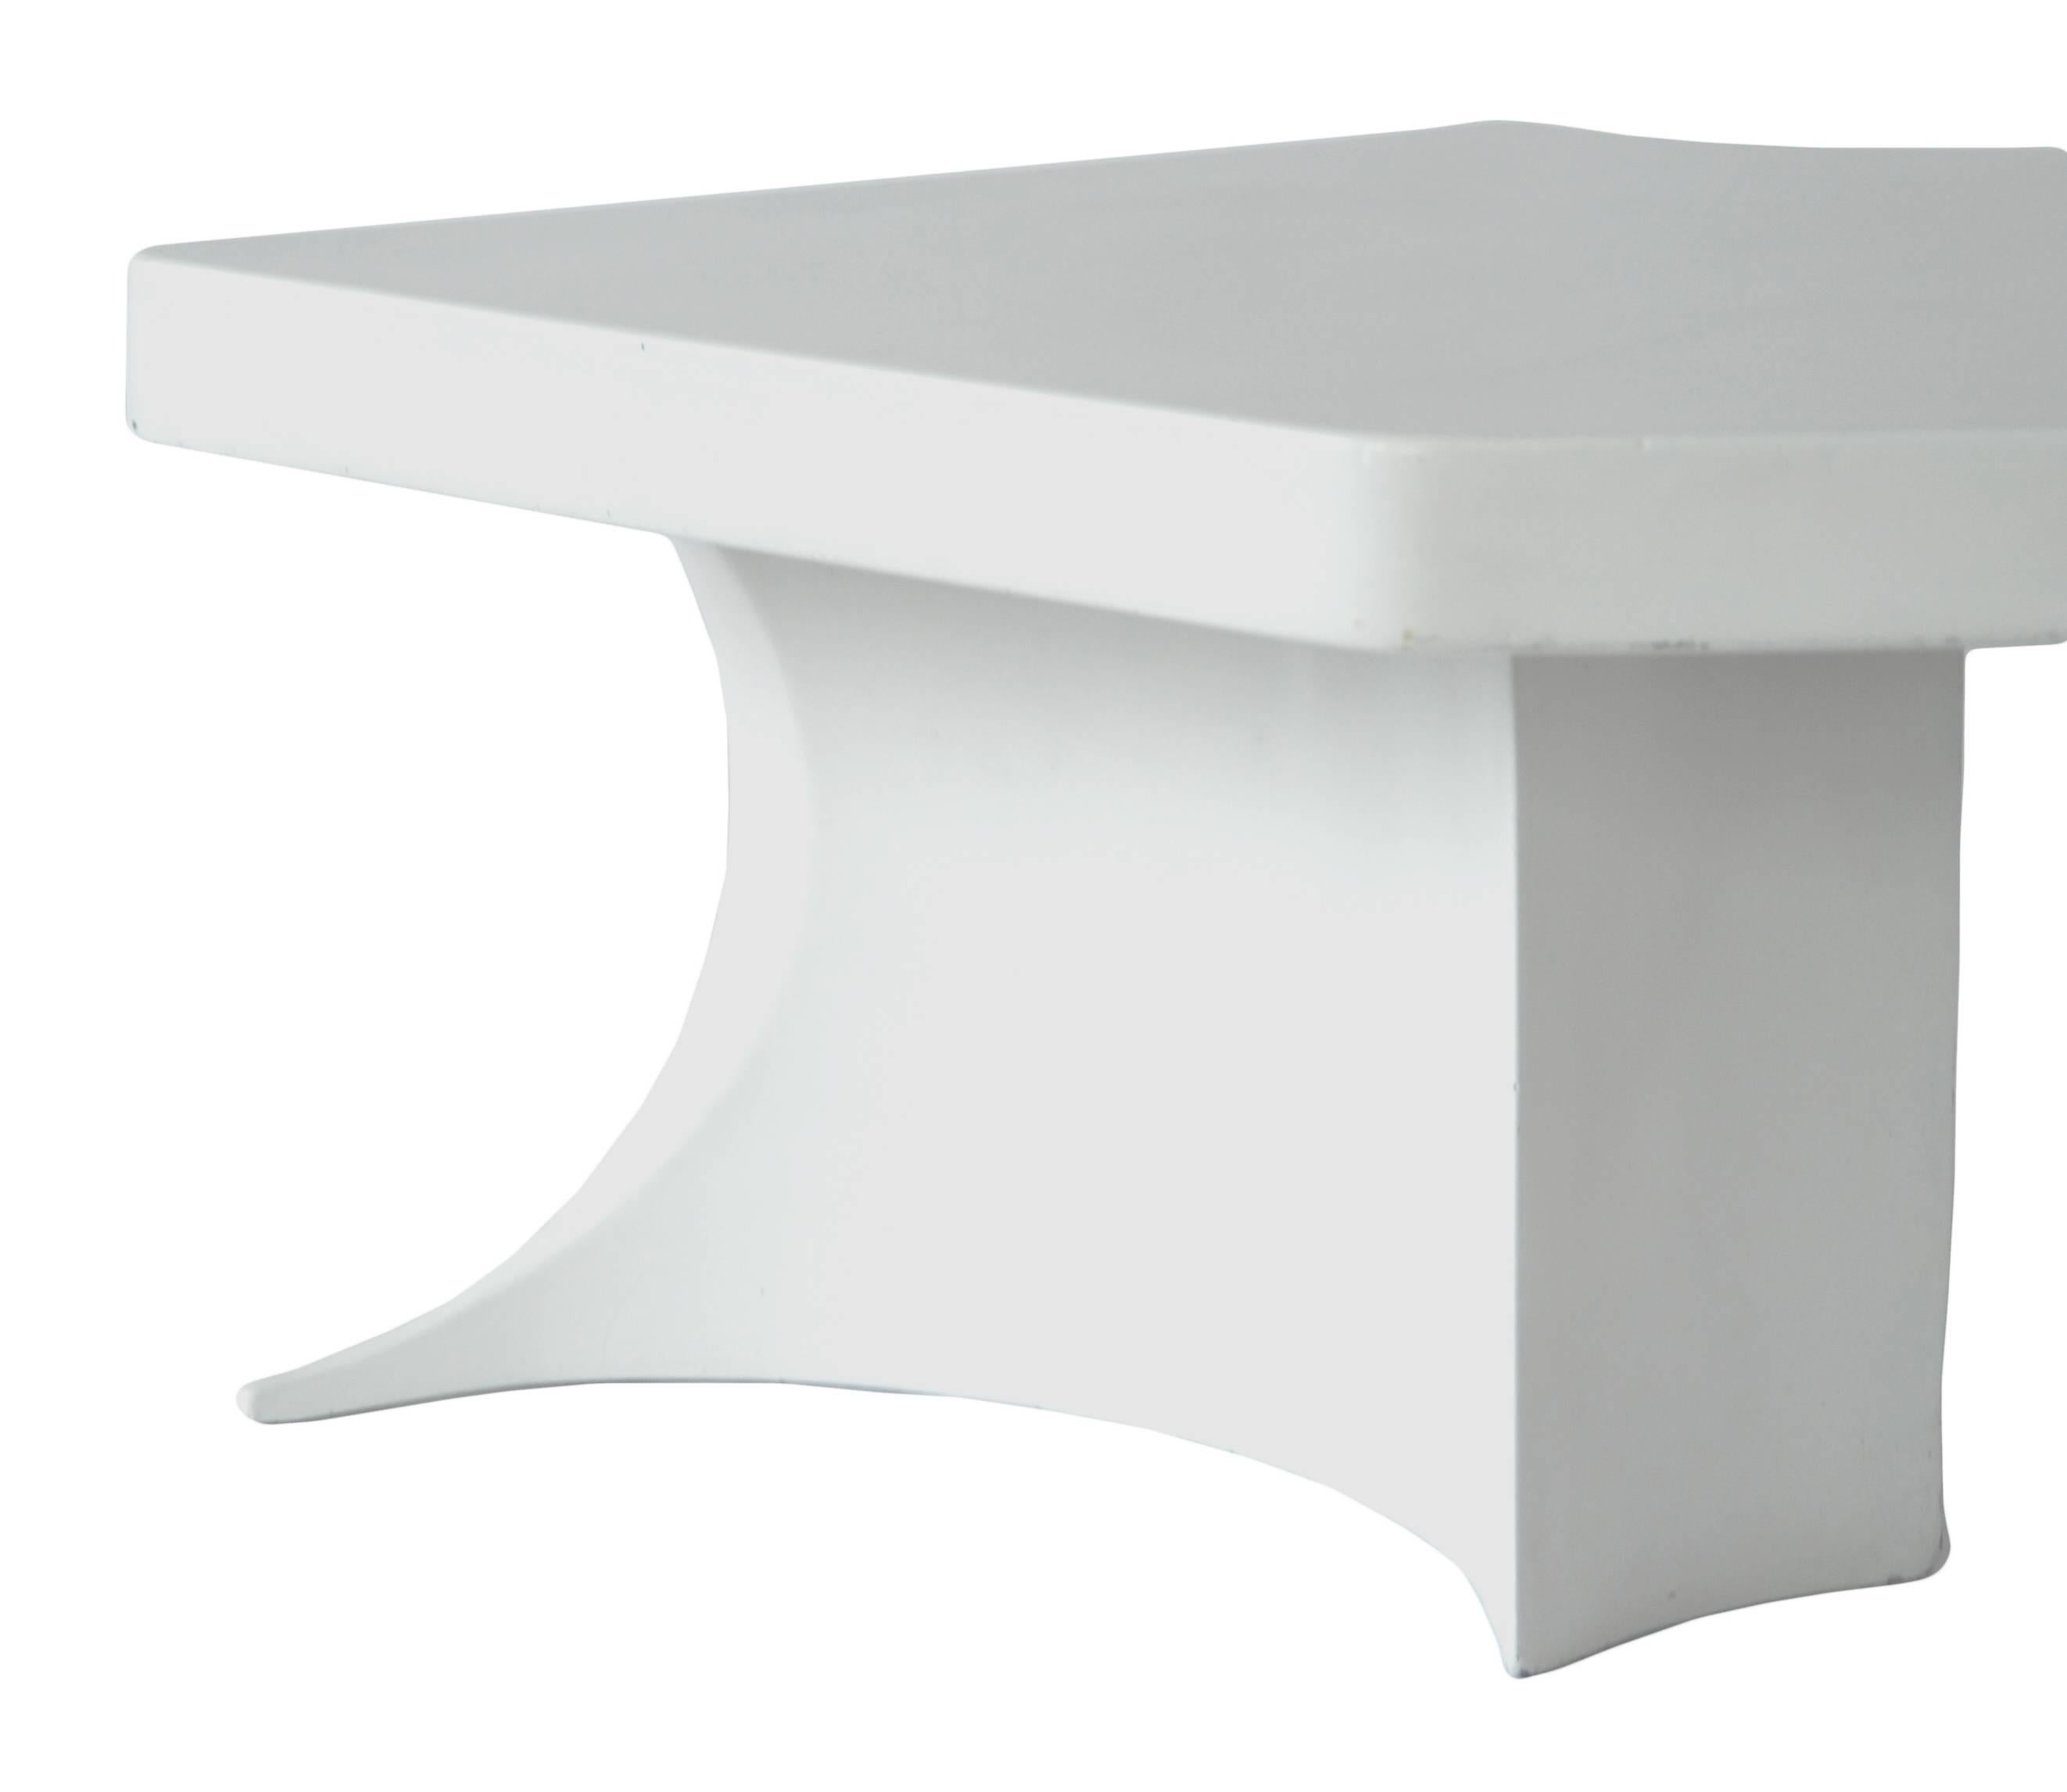 Table attributed to Arturo Pani.
Mexico, 1970s.
Material: Fiberglass.
Dimensions: H 17 in, W 53 in, D 24.25 in.